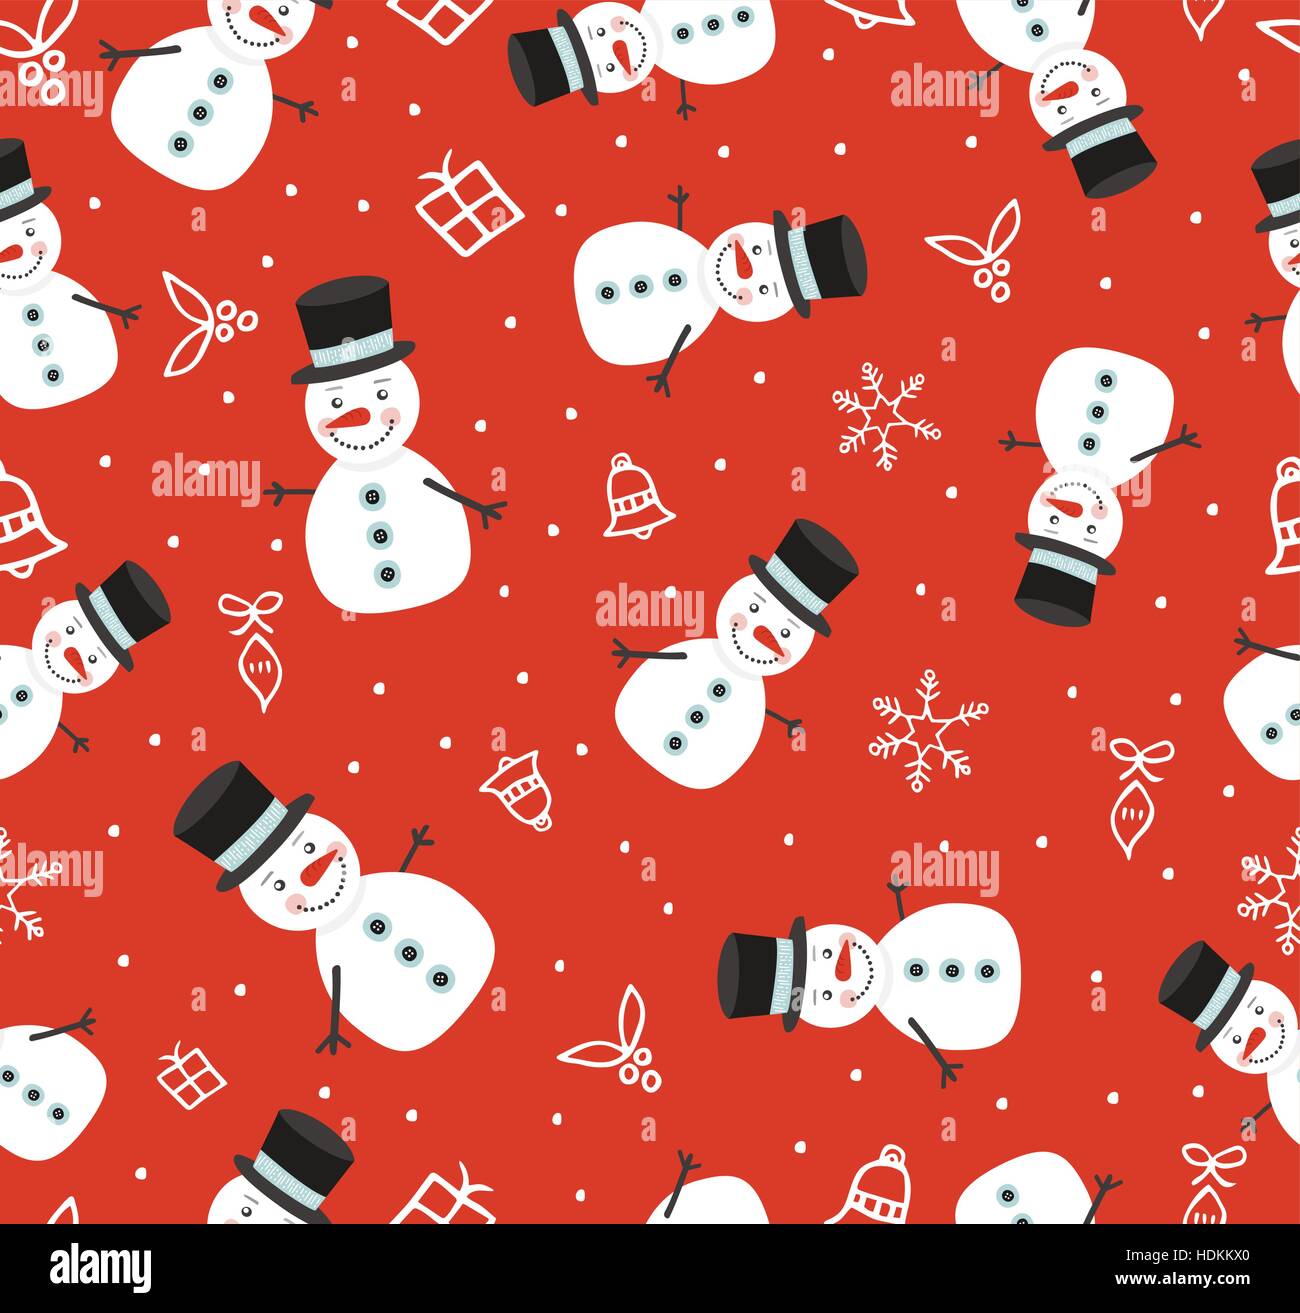 Merry Christmas seamless pattern background, cute snowman holiday ...